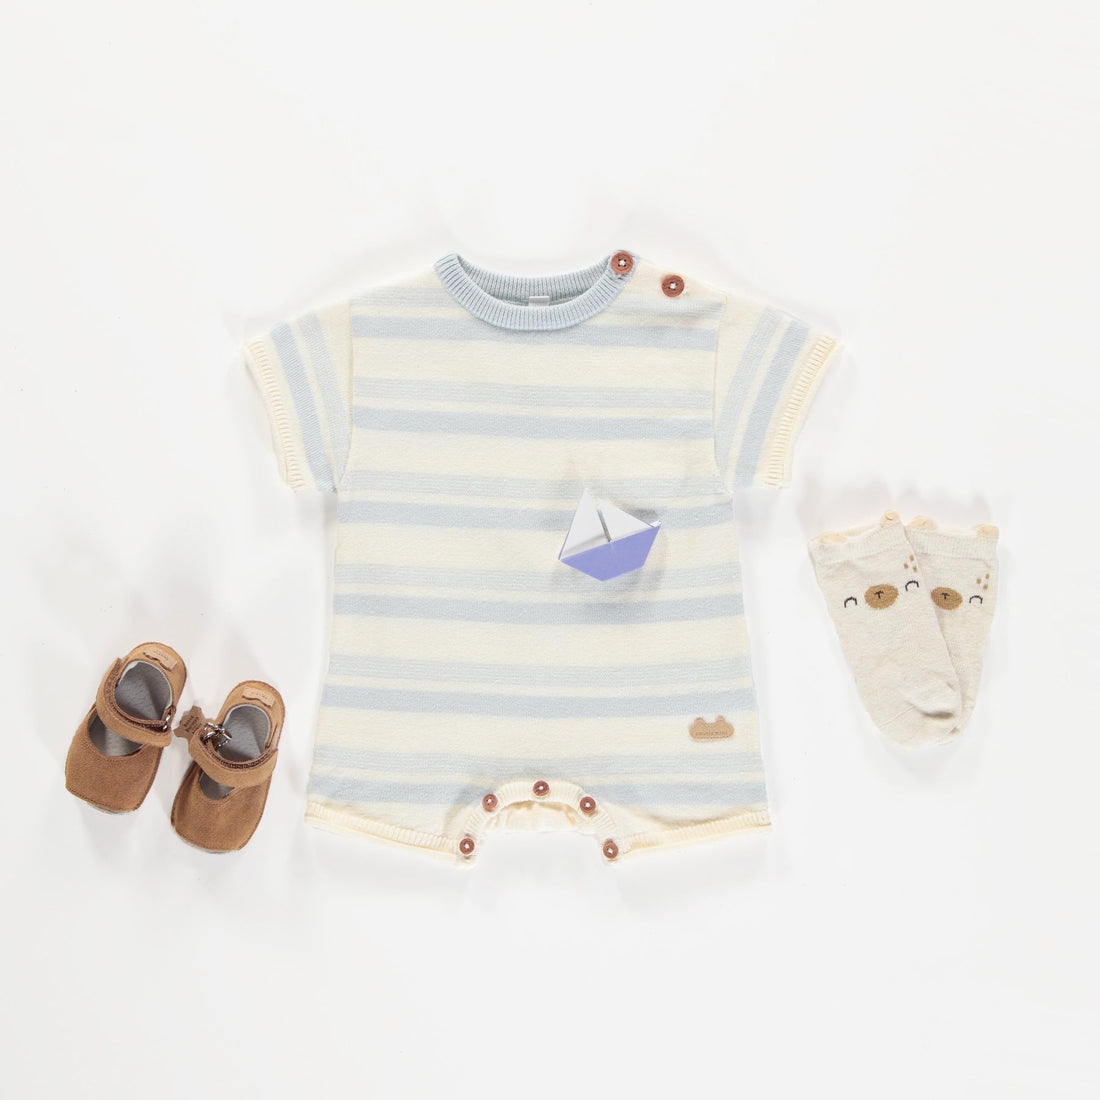 KNITTED ONE-PIECE WITH BABY BLUE AND CREAM STRIPES, NEWBORN